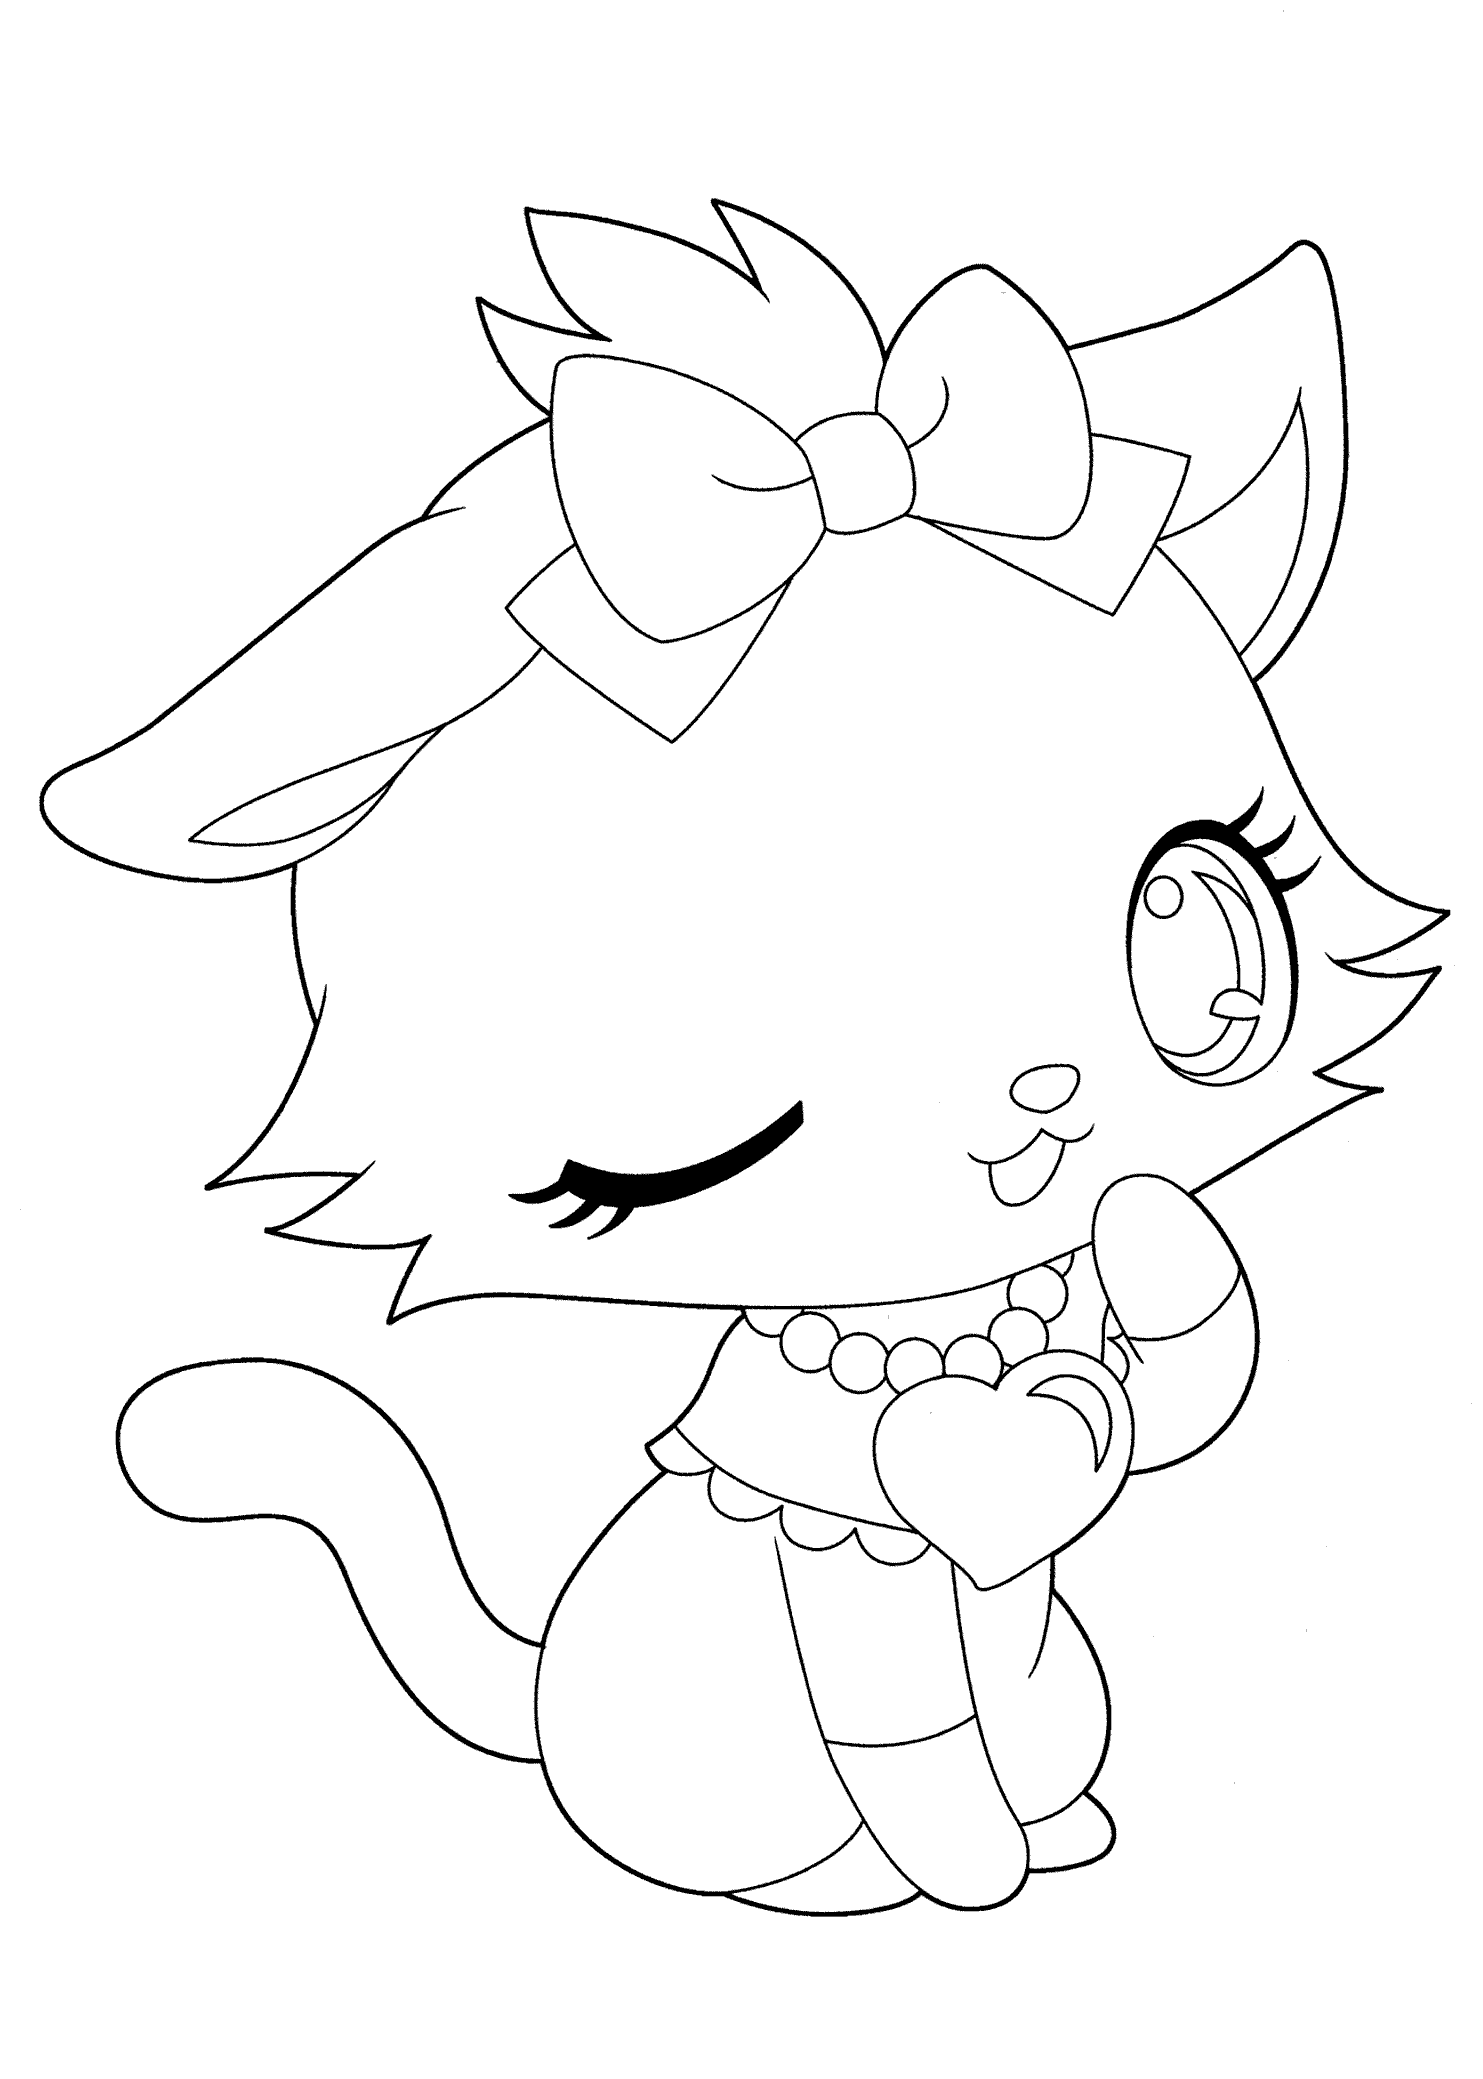 Anime Cats Coloring Pages - Cute Anime Cats Coloring Pages